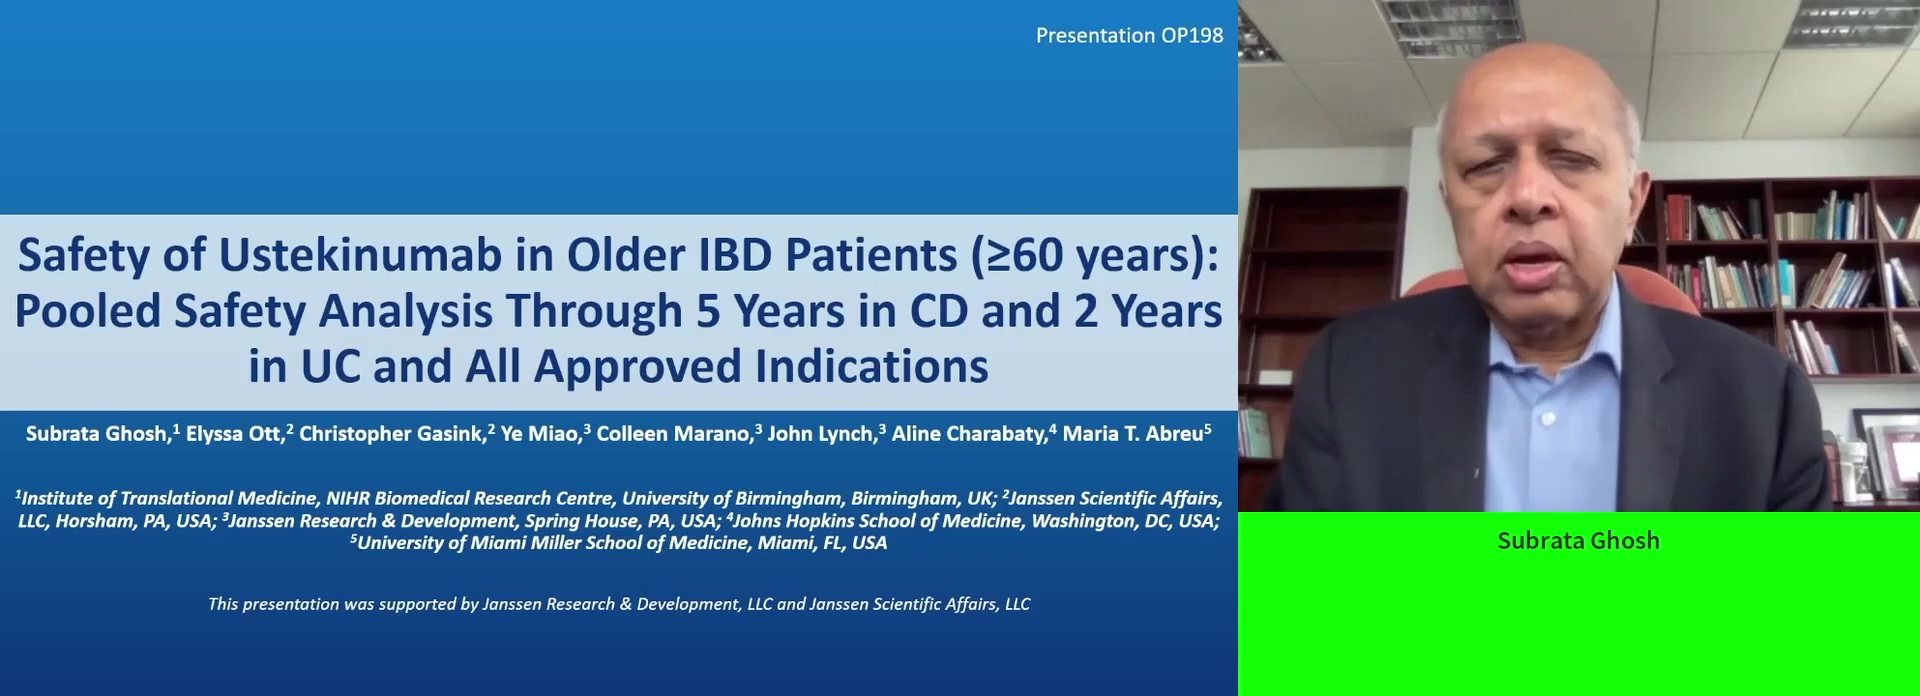 SAFETY OF USTEKINUMAB IN OLDER IBD PATIENTS (>=60 YEARS): POOLED SAFETY ANALYSIS THROUGH 5 YEARS IN CD AND 2 YEARS IN UC AND ALL APPROVED INDICATIONS